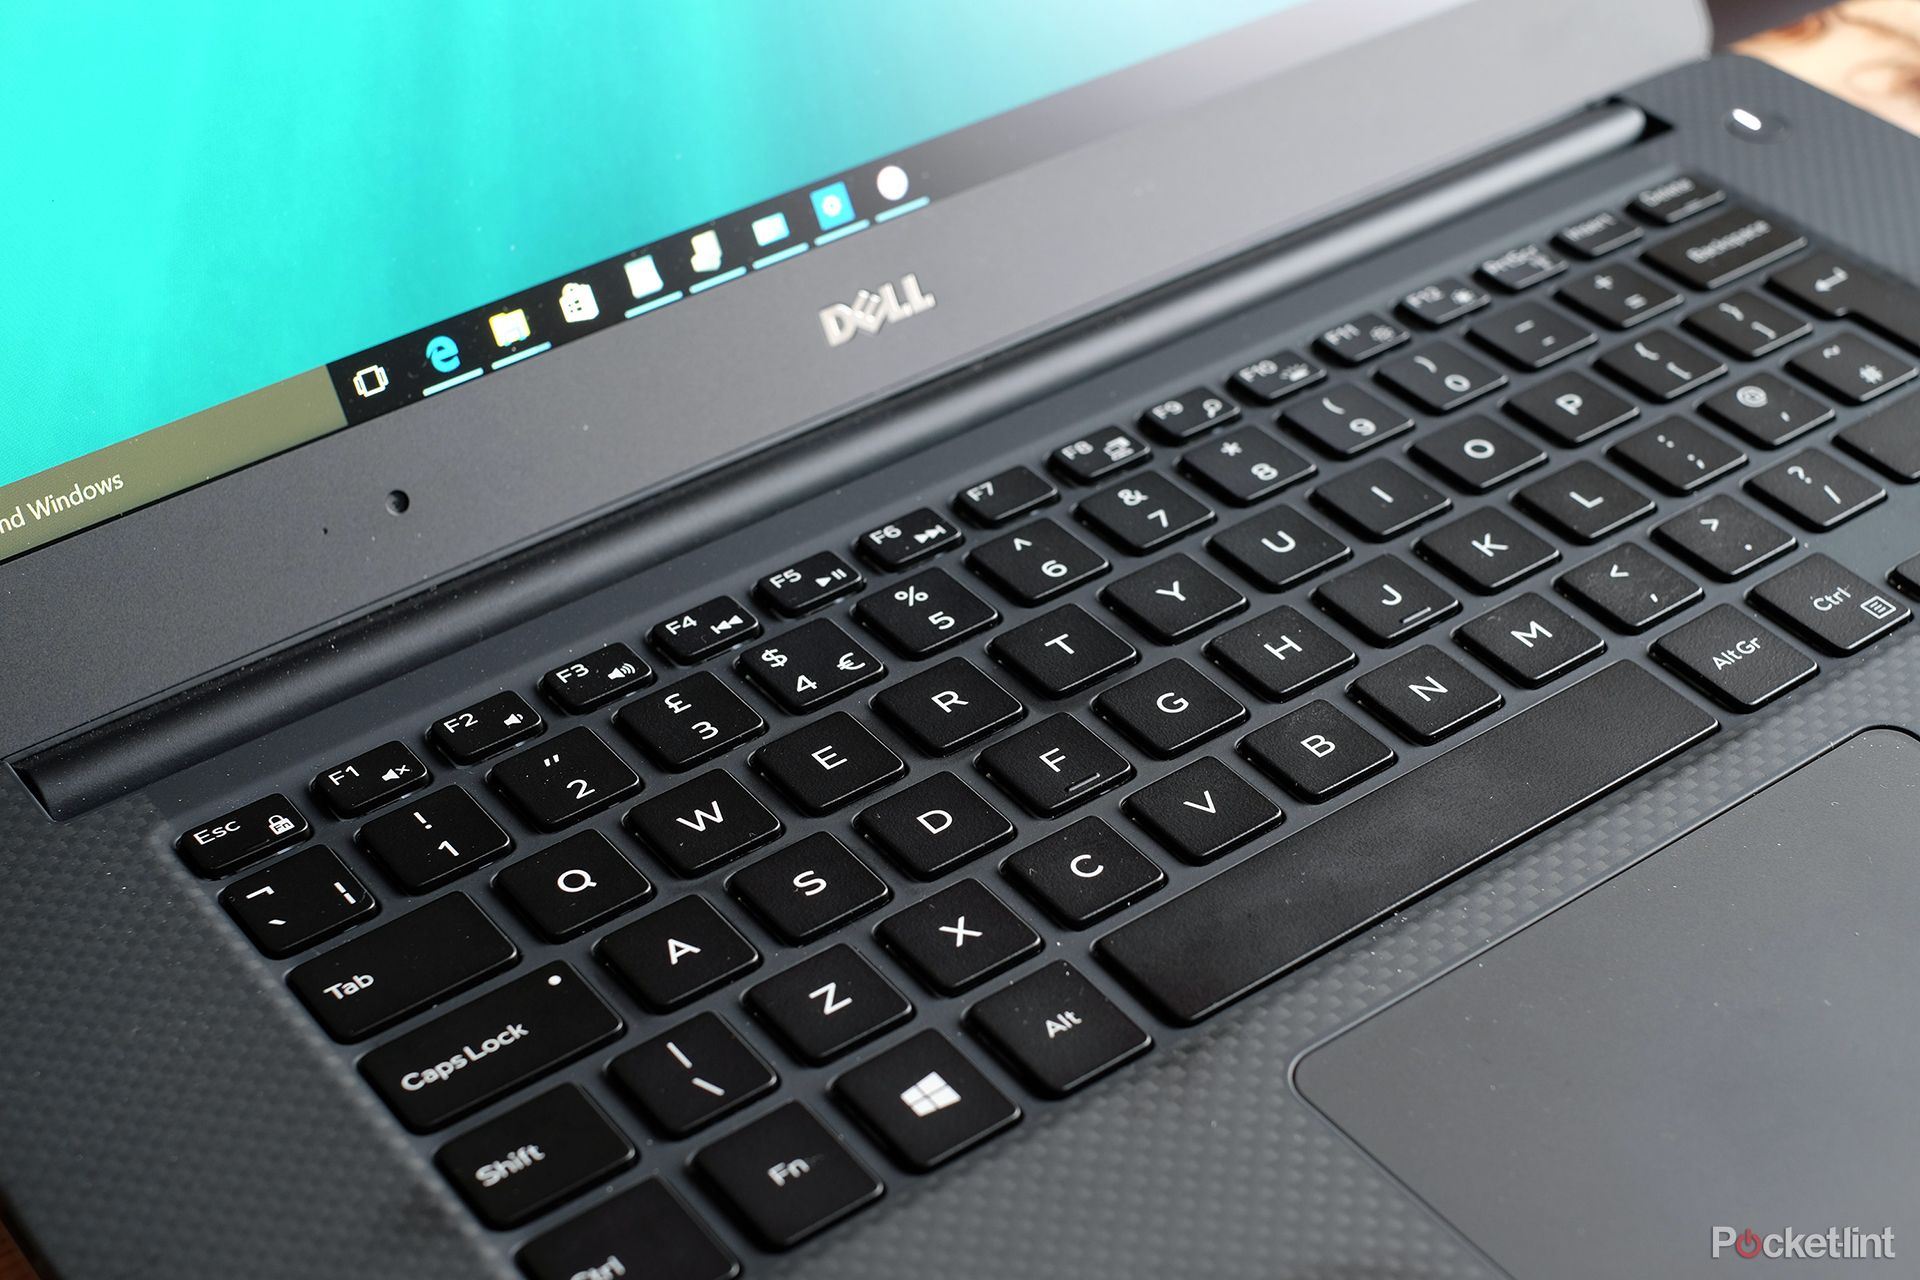 dell xps 15 2016 review image 3